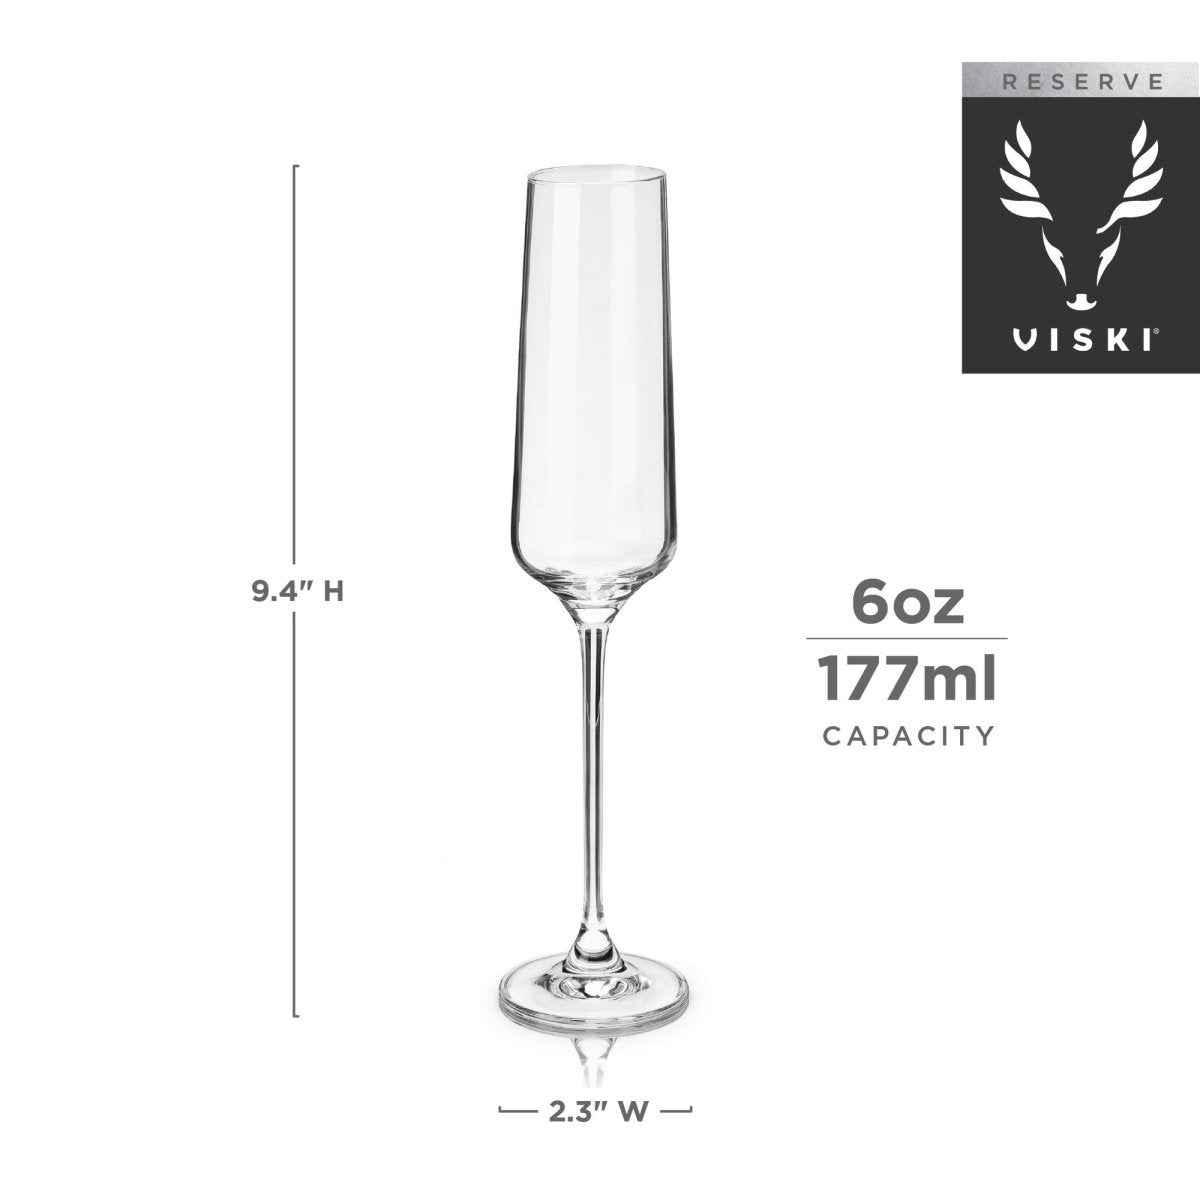 JoyJolt Champagne Flutes – Layla Collection Crystal Champagne  Glasses Set of 4 – 6.7 Ounce Capacity – Ideal for Home Bar, Special  Occasions – Made in Europe: Champagne Glasses